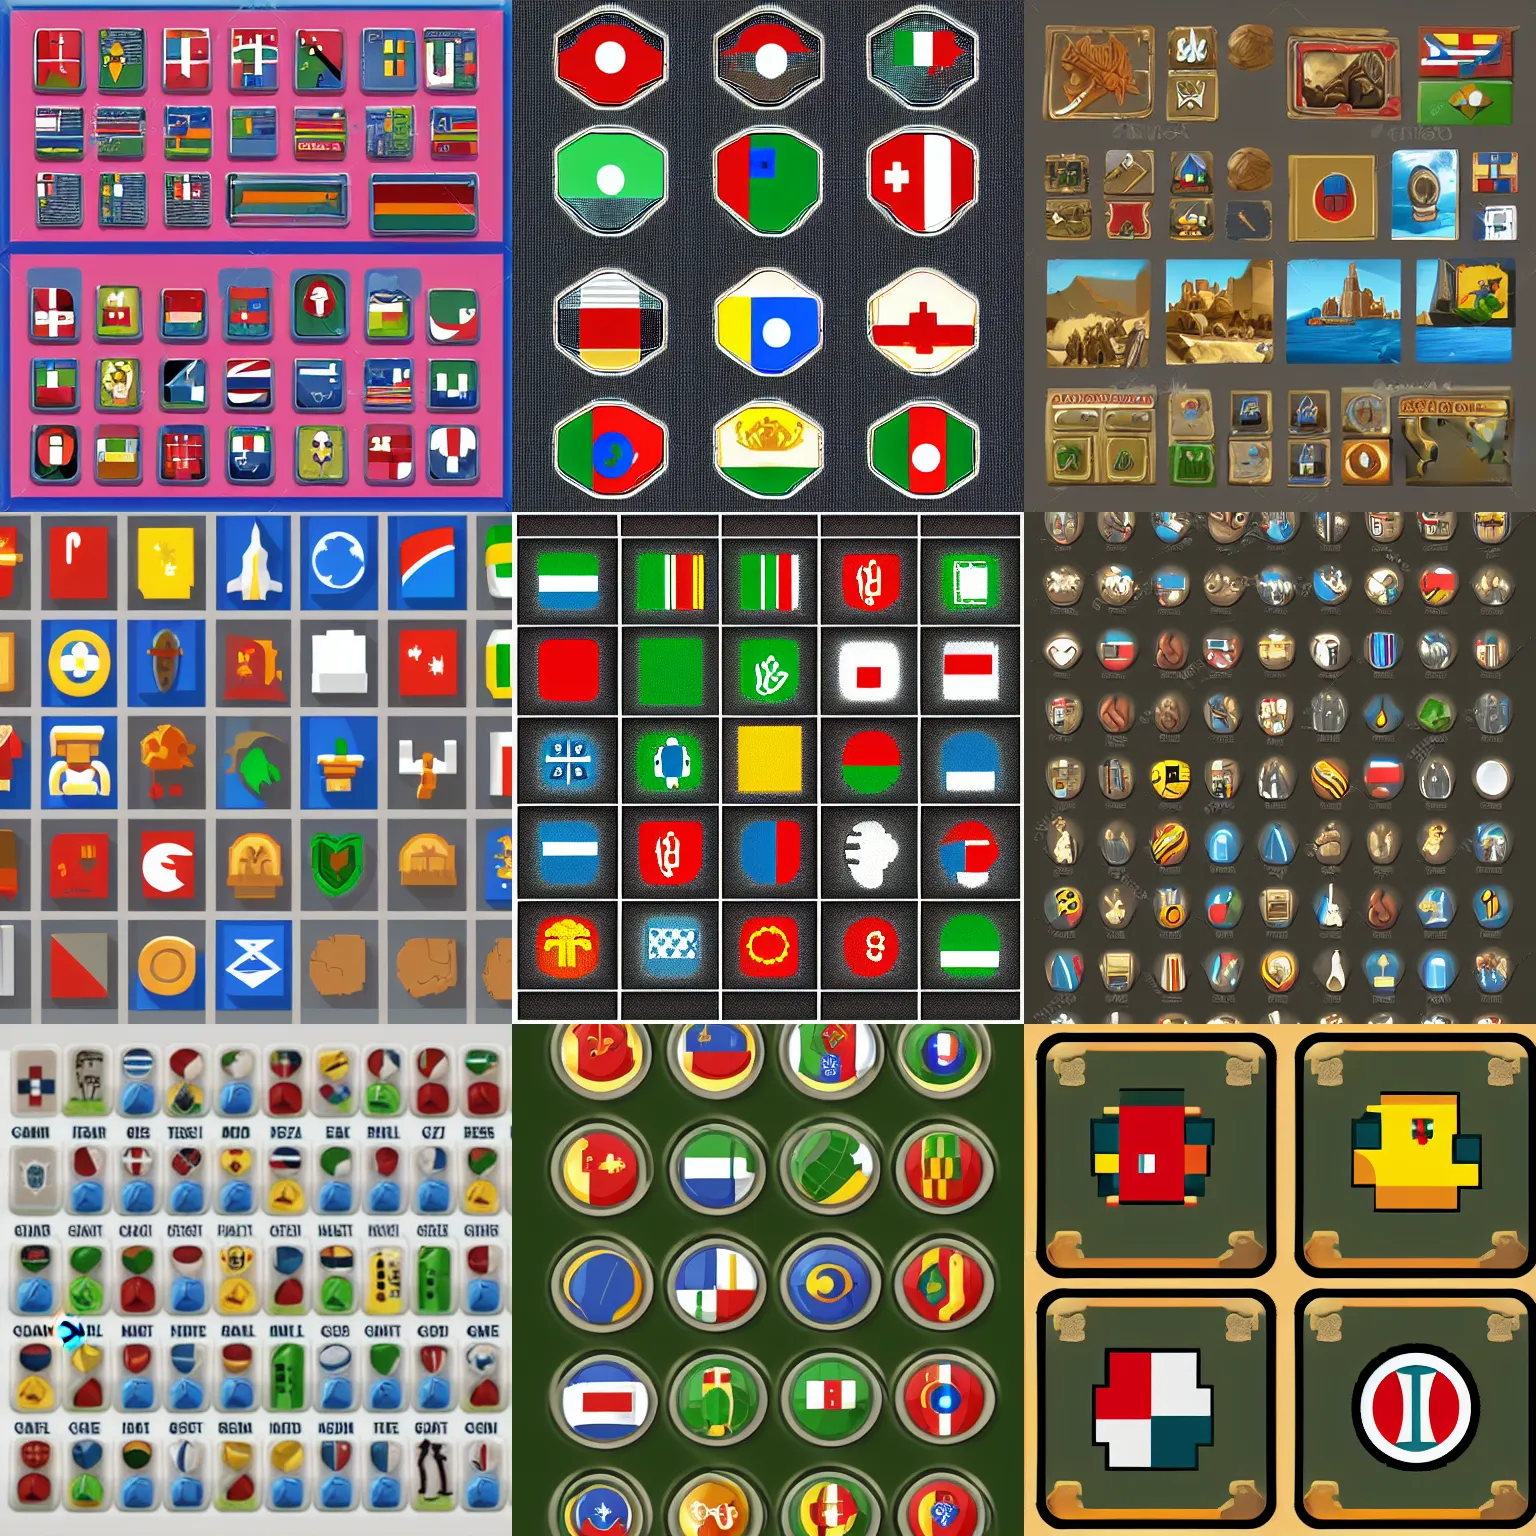 Prompt: iconset for italian faction for ` colonization 9 5 `, sid meier, pixel, icons, game icons, high quality, 2 5 6 x 2 5 6, asset store, strategy game